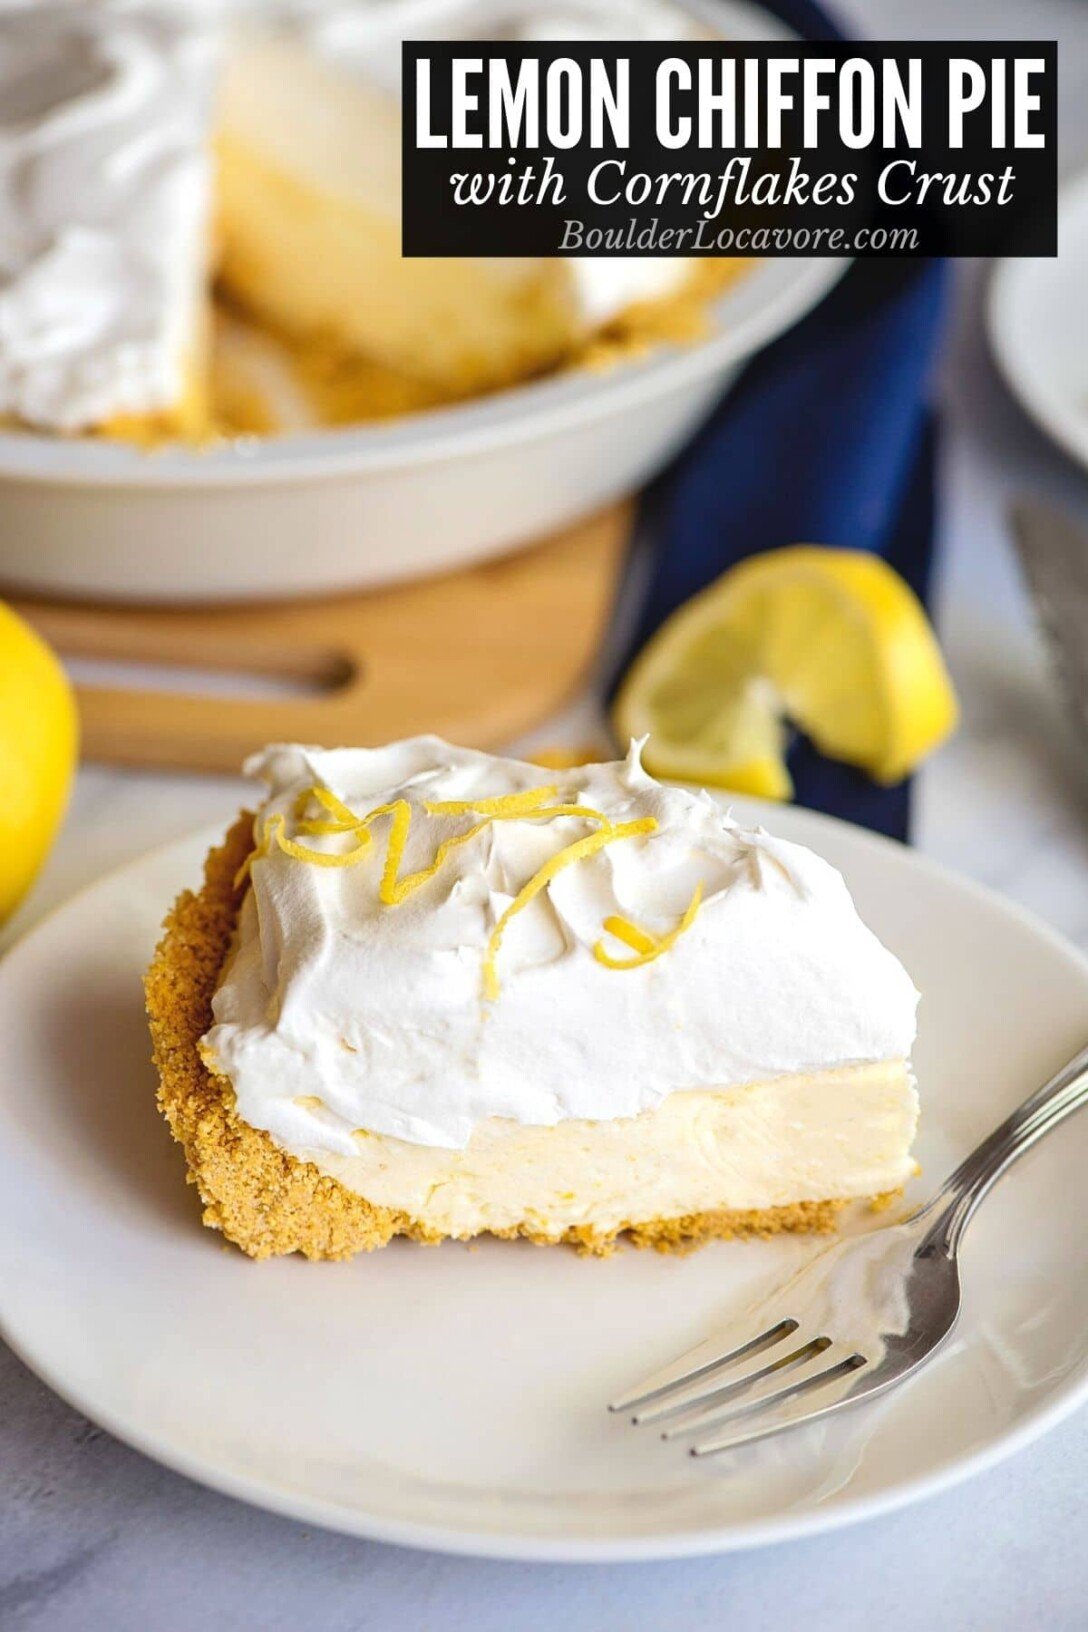 slice of Lemon Chiffon pie on plate with recipe title on image